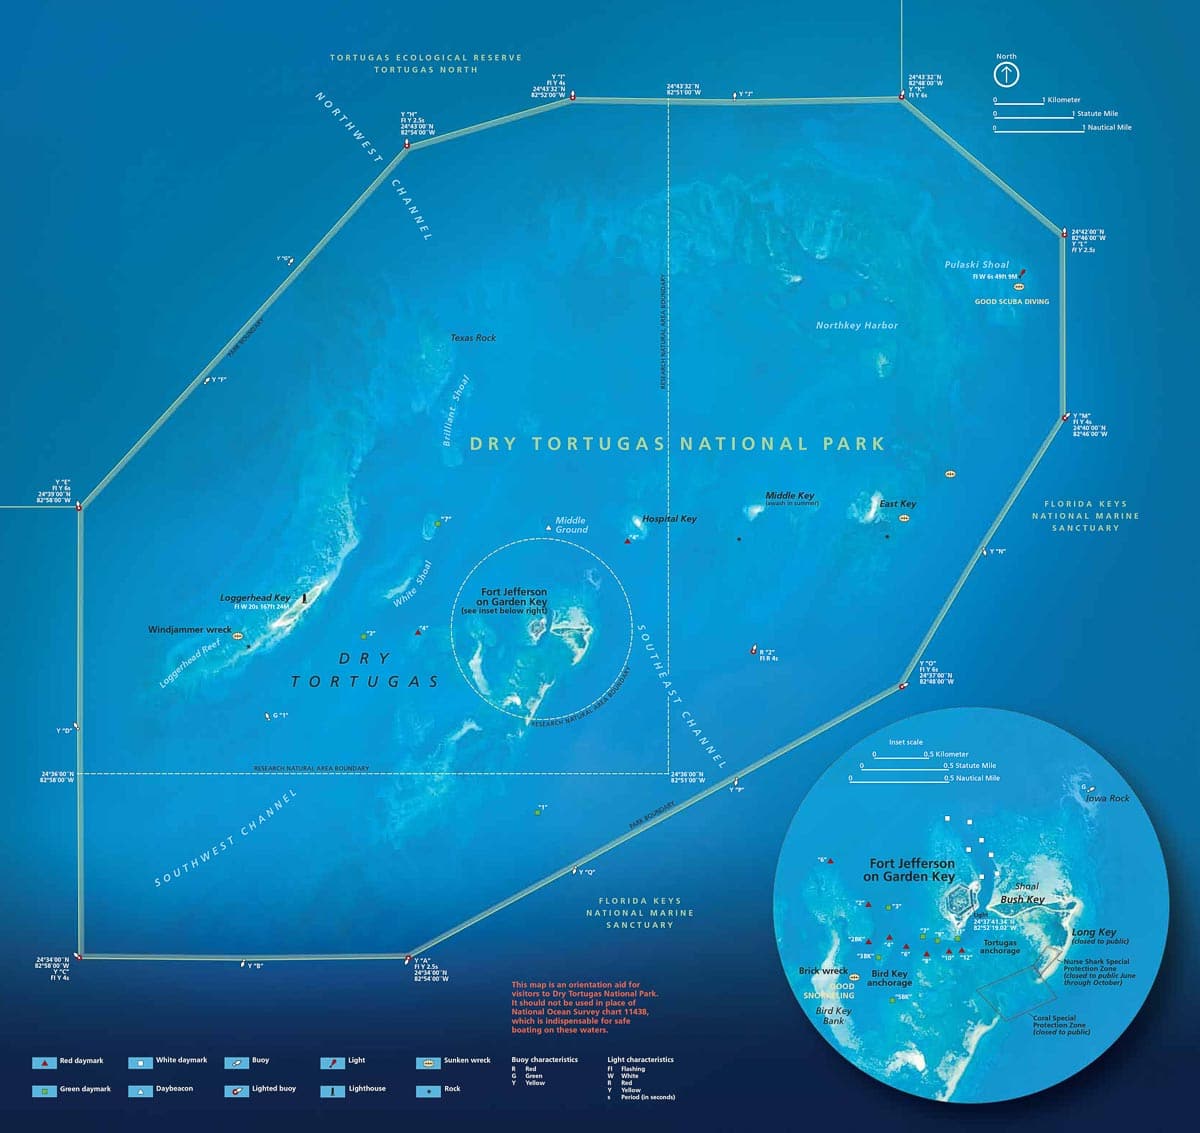 Dry Tortugas National Park Map - Image credit NPS